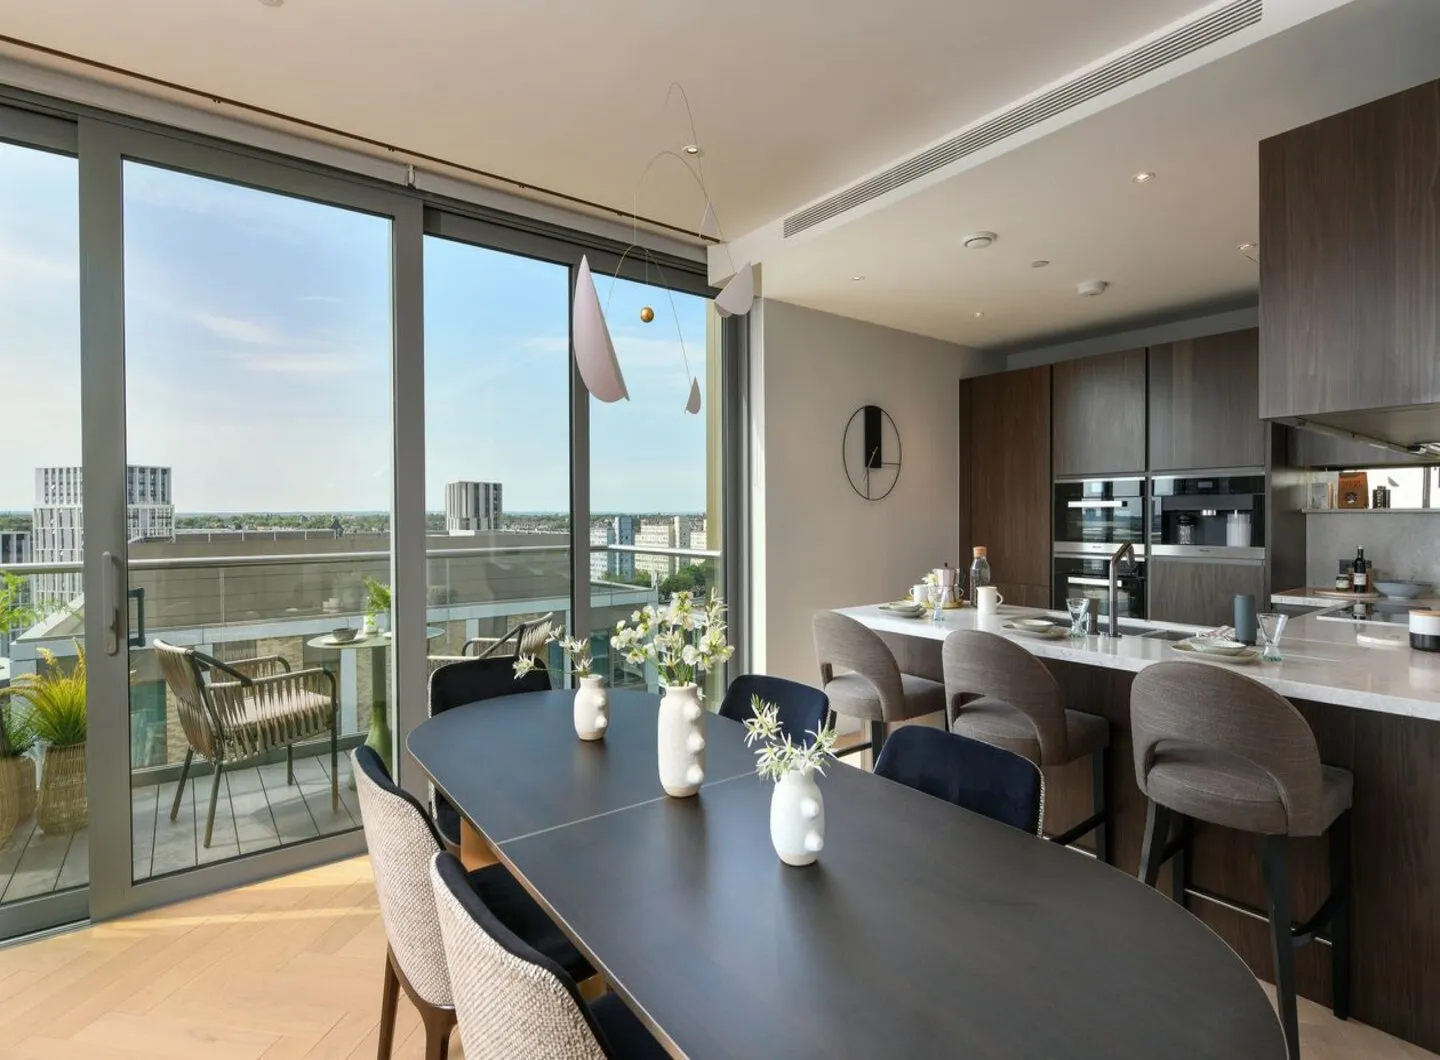 Prince of Wales Drive, London, 287 cucine,contract